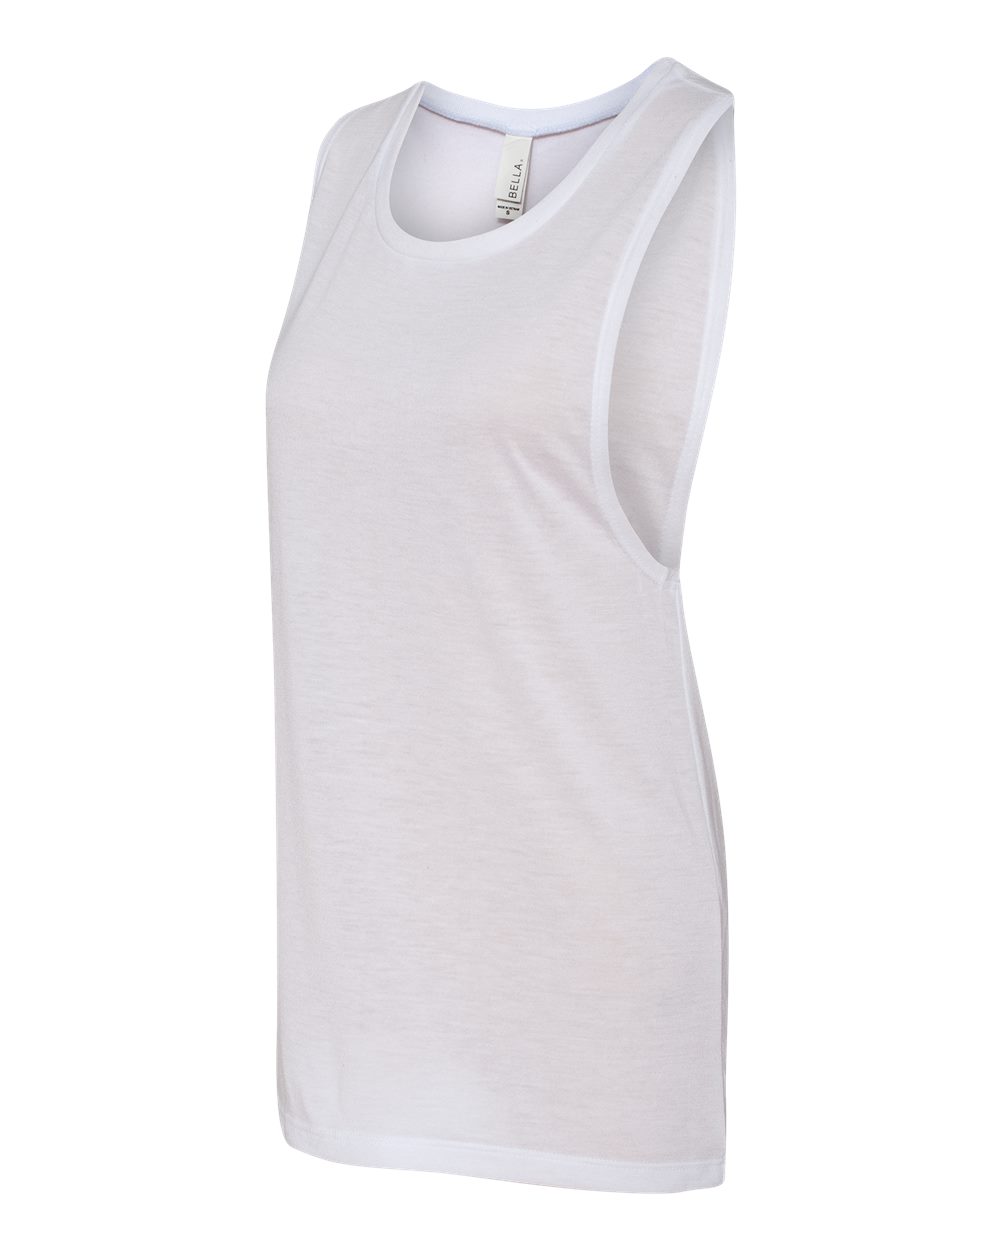 BELLA + CANVAS - Women's Flowy Scoop Muscle Tank - 8803- BULK SALE - QTY 9 $39.00 Ideal for sublimation printing